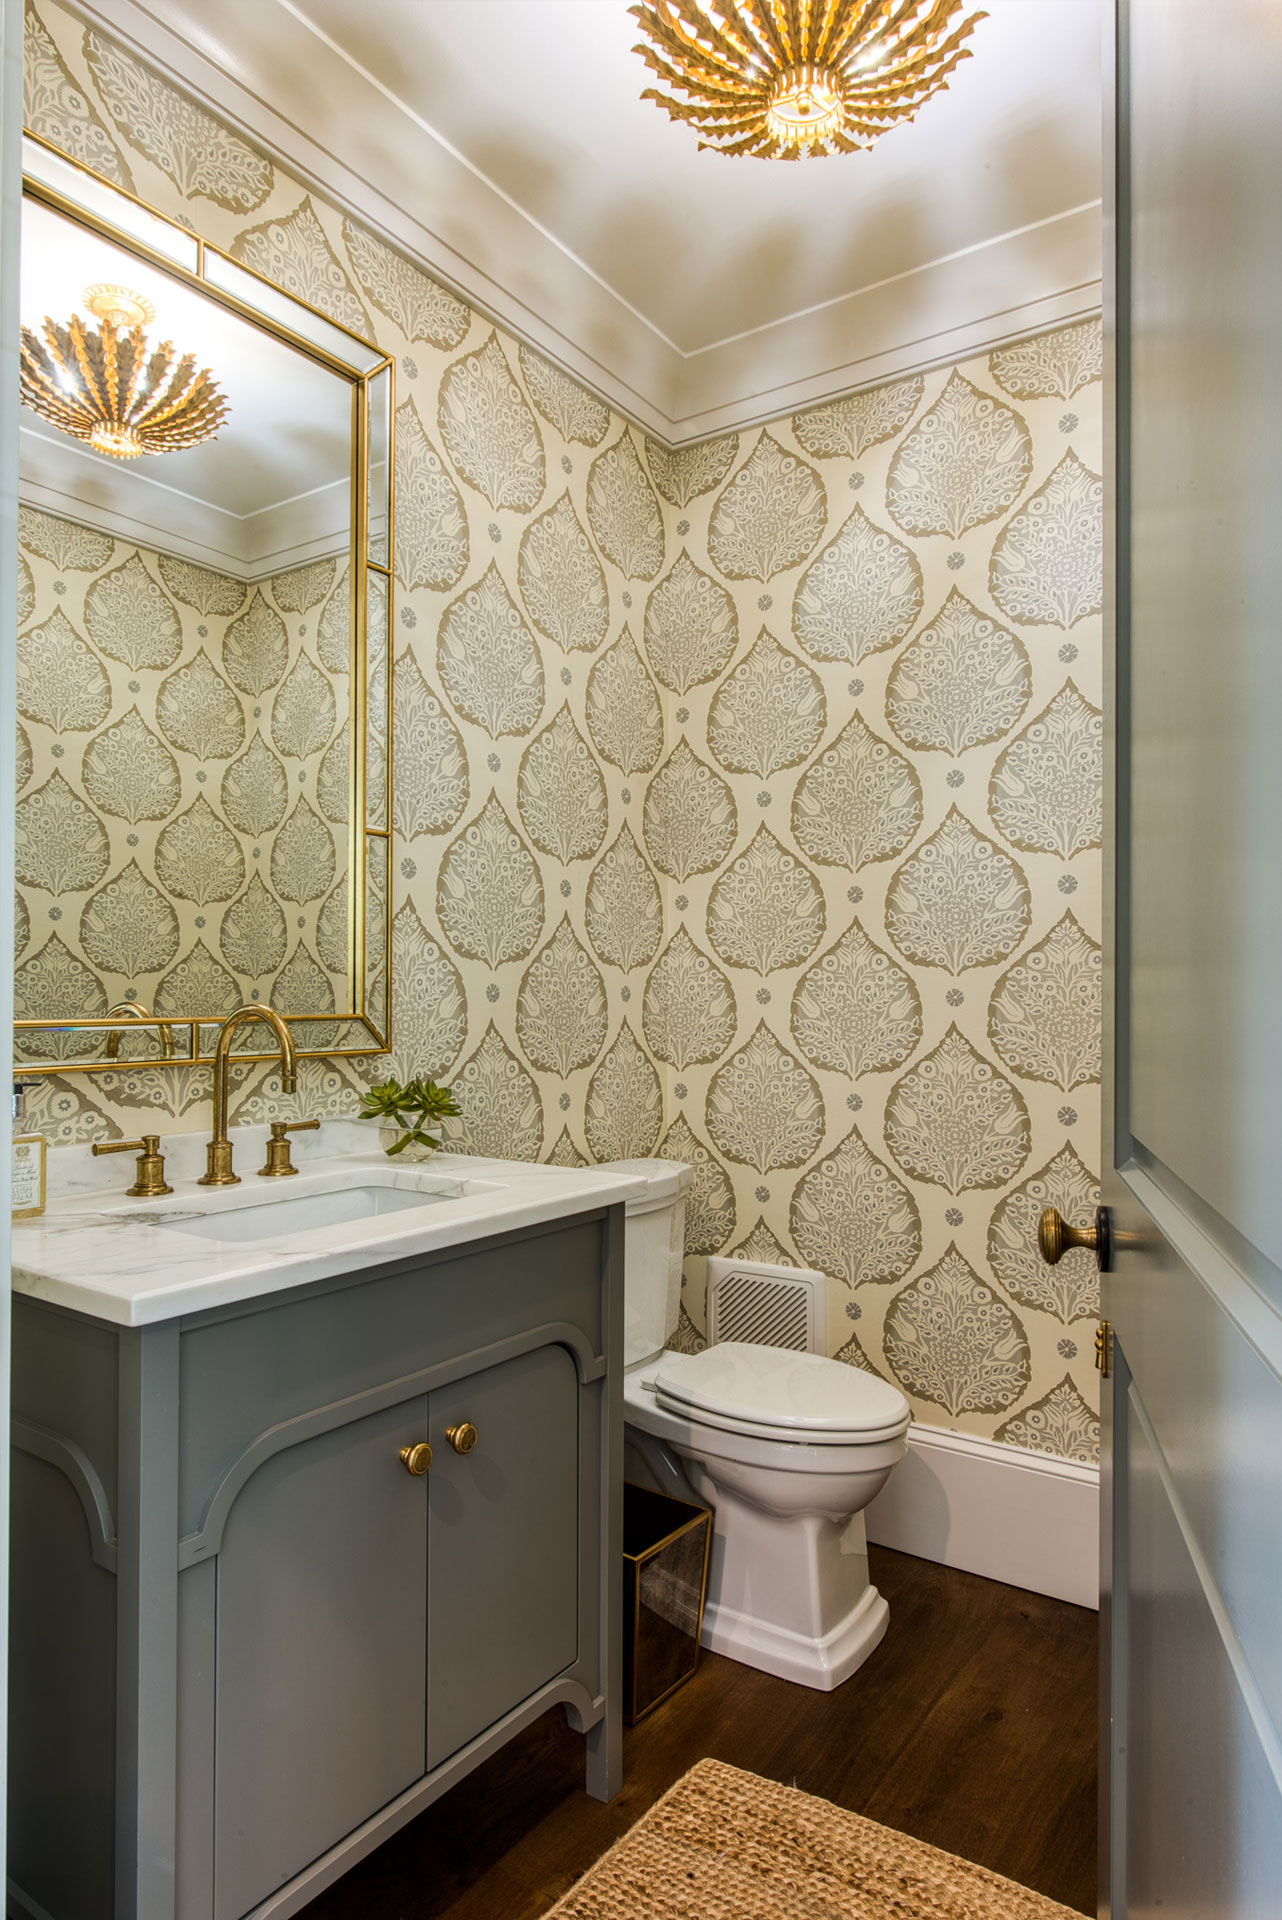 Powder room with bold wallpaper